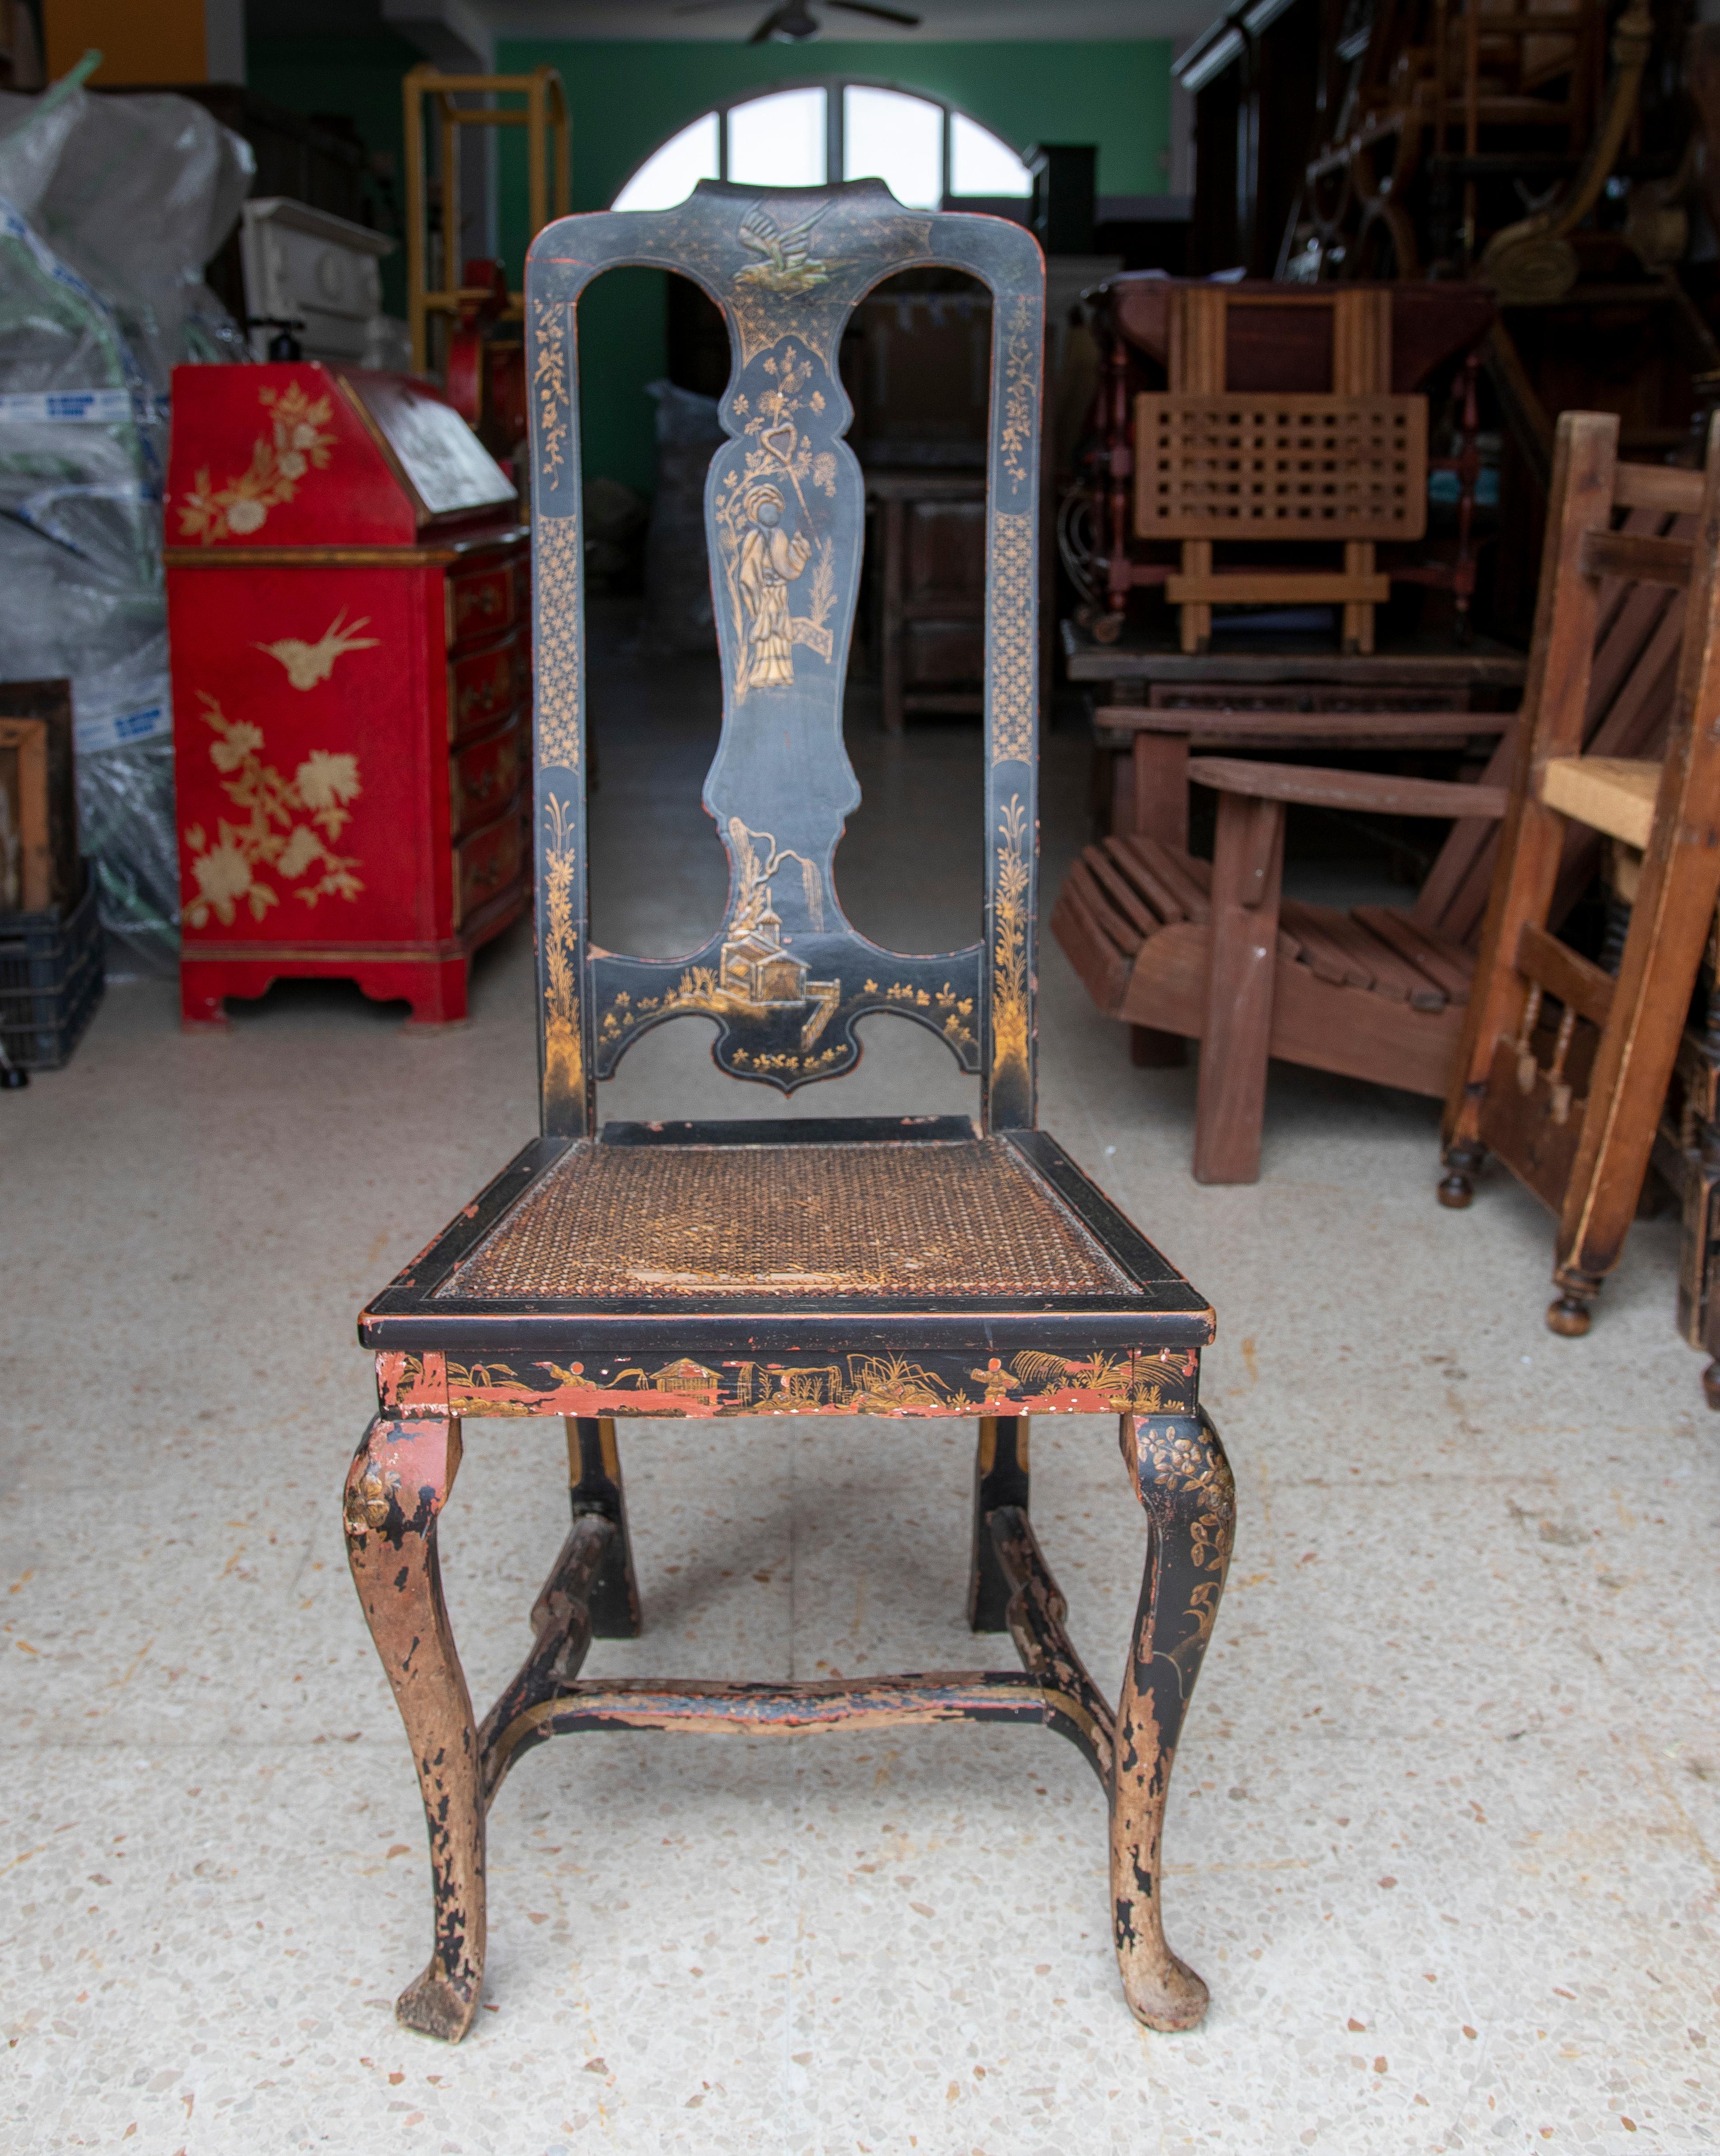 19th century Chinoiserie lacquered chair from England.